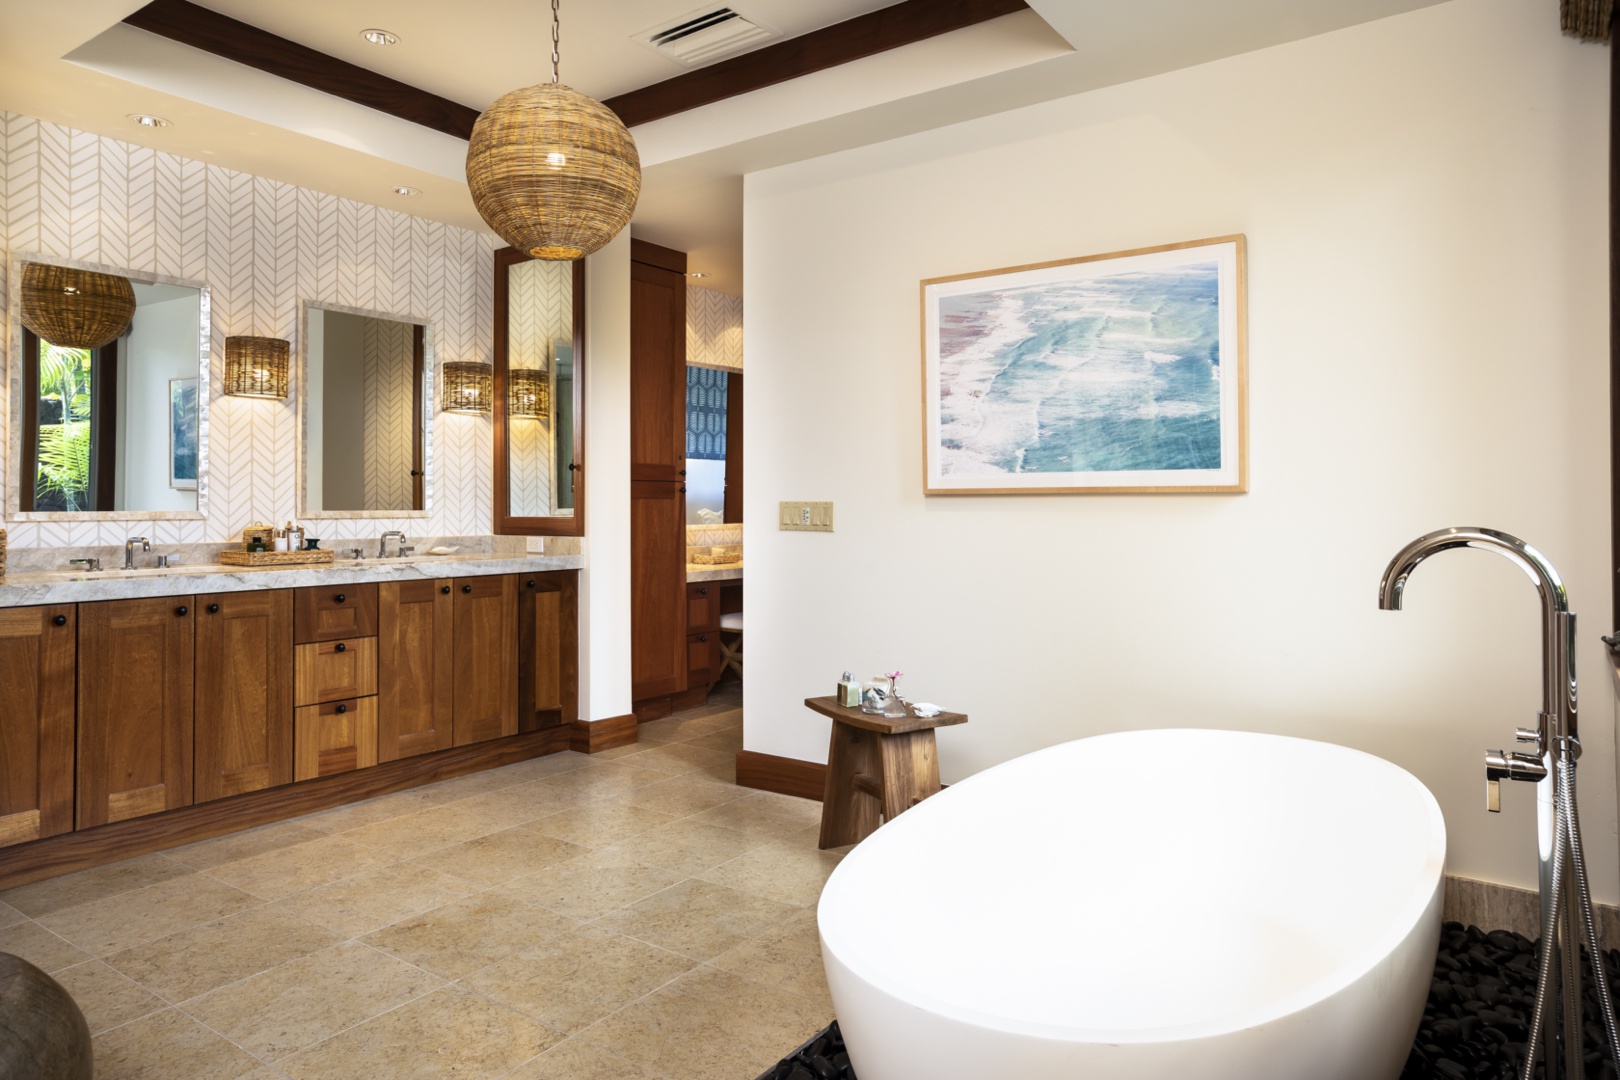 Kailua Kona Vacation Rentals, 4BD Kahikole Street (218) Estate Home at Four Seasons Resort at Hualalai - Reverse view featuring dual sinks, with private W/C & vanity space beyond